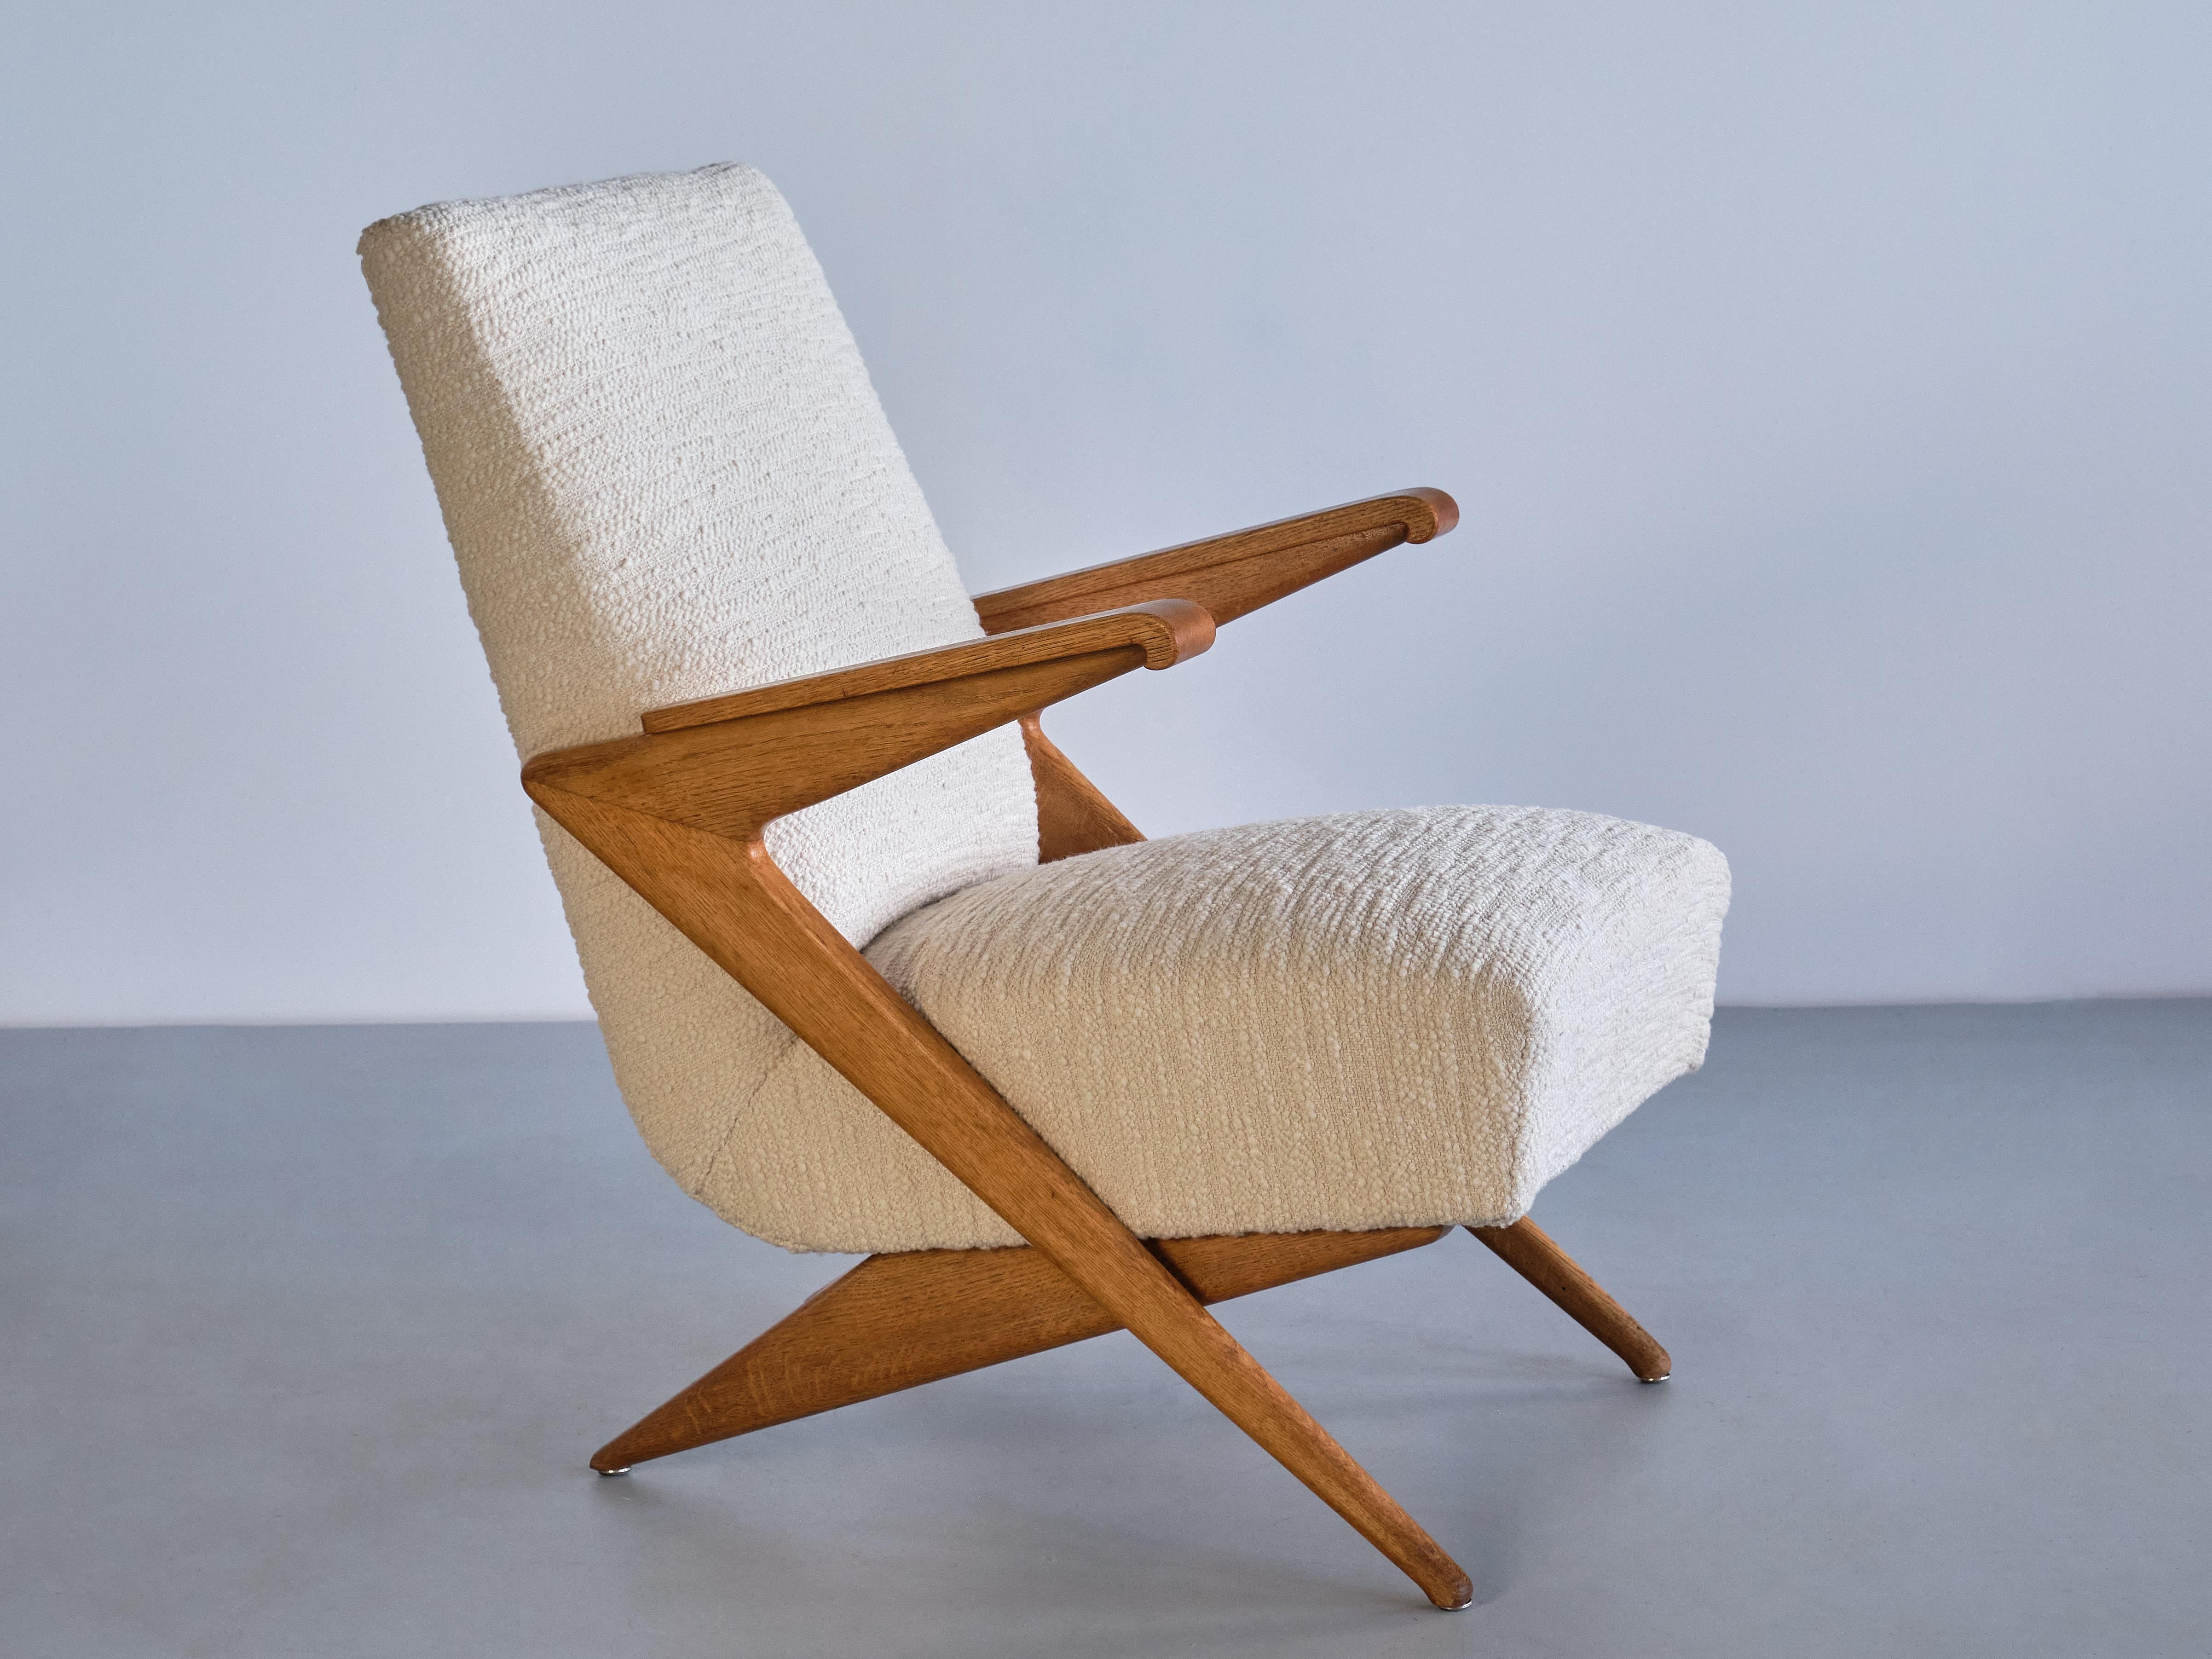 This rare armchair was produced in France in the late 1950s. The design of this particular model is attributed to the designer Gustave Gautier.

The chair is characterized by the sharp angles, geometric lines and scissor construction of the solid